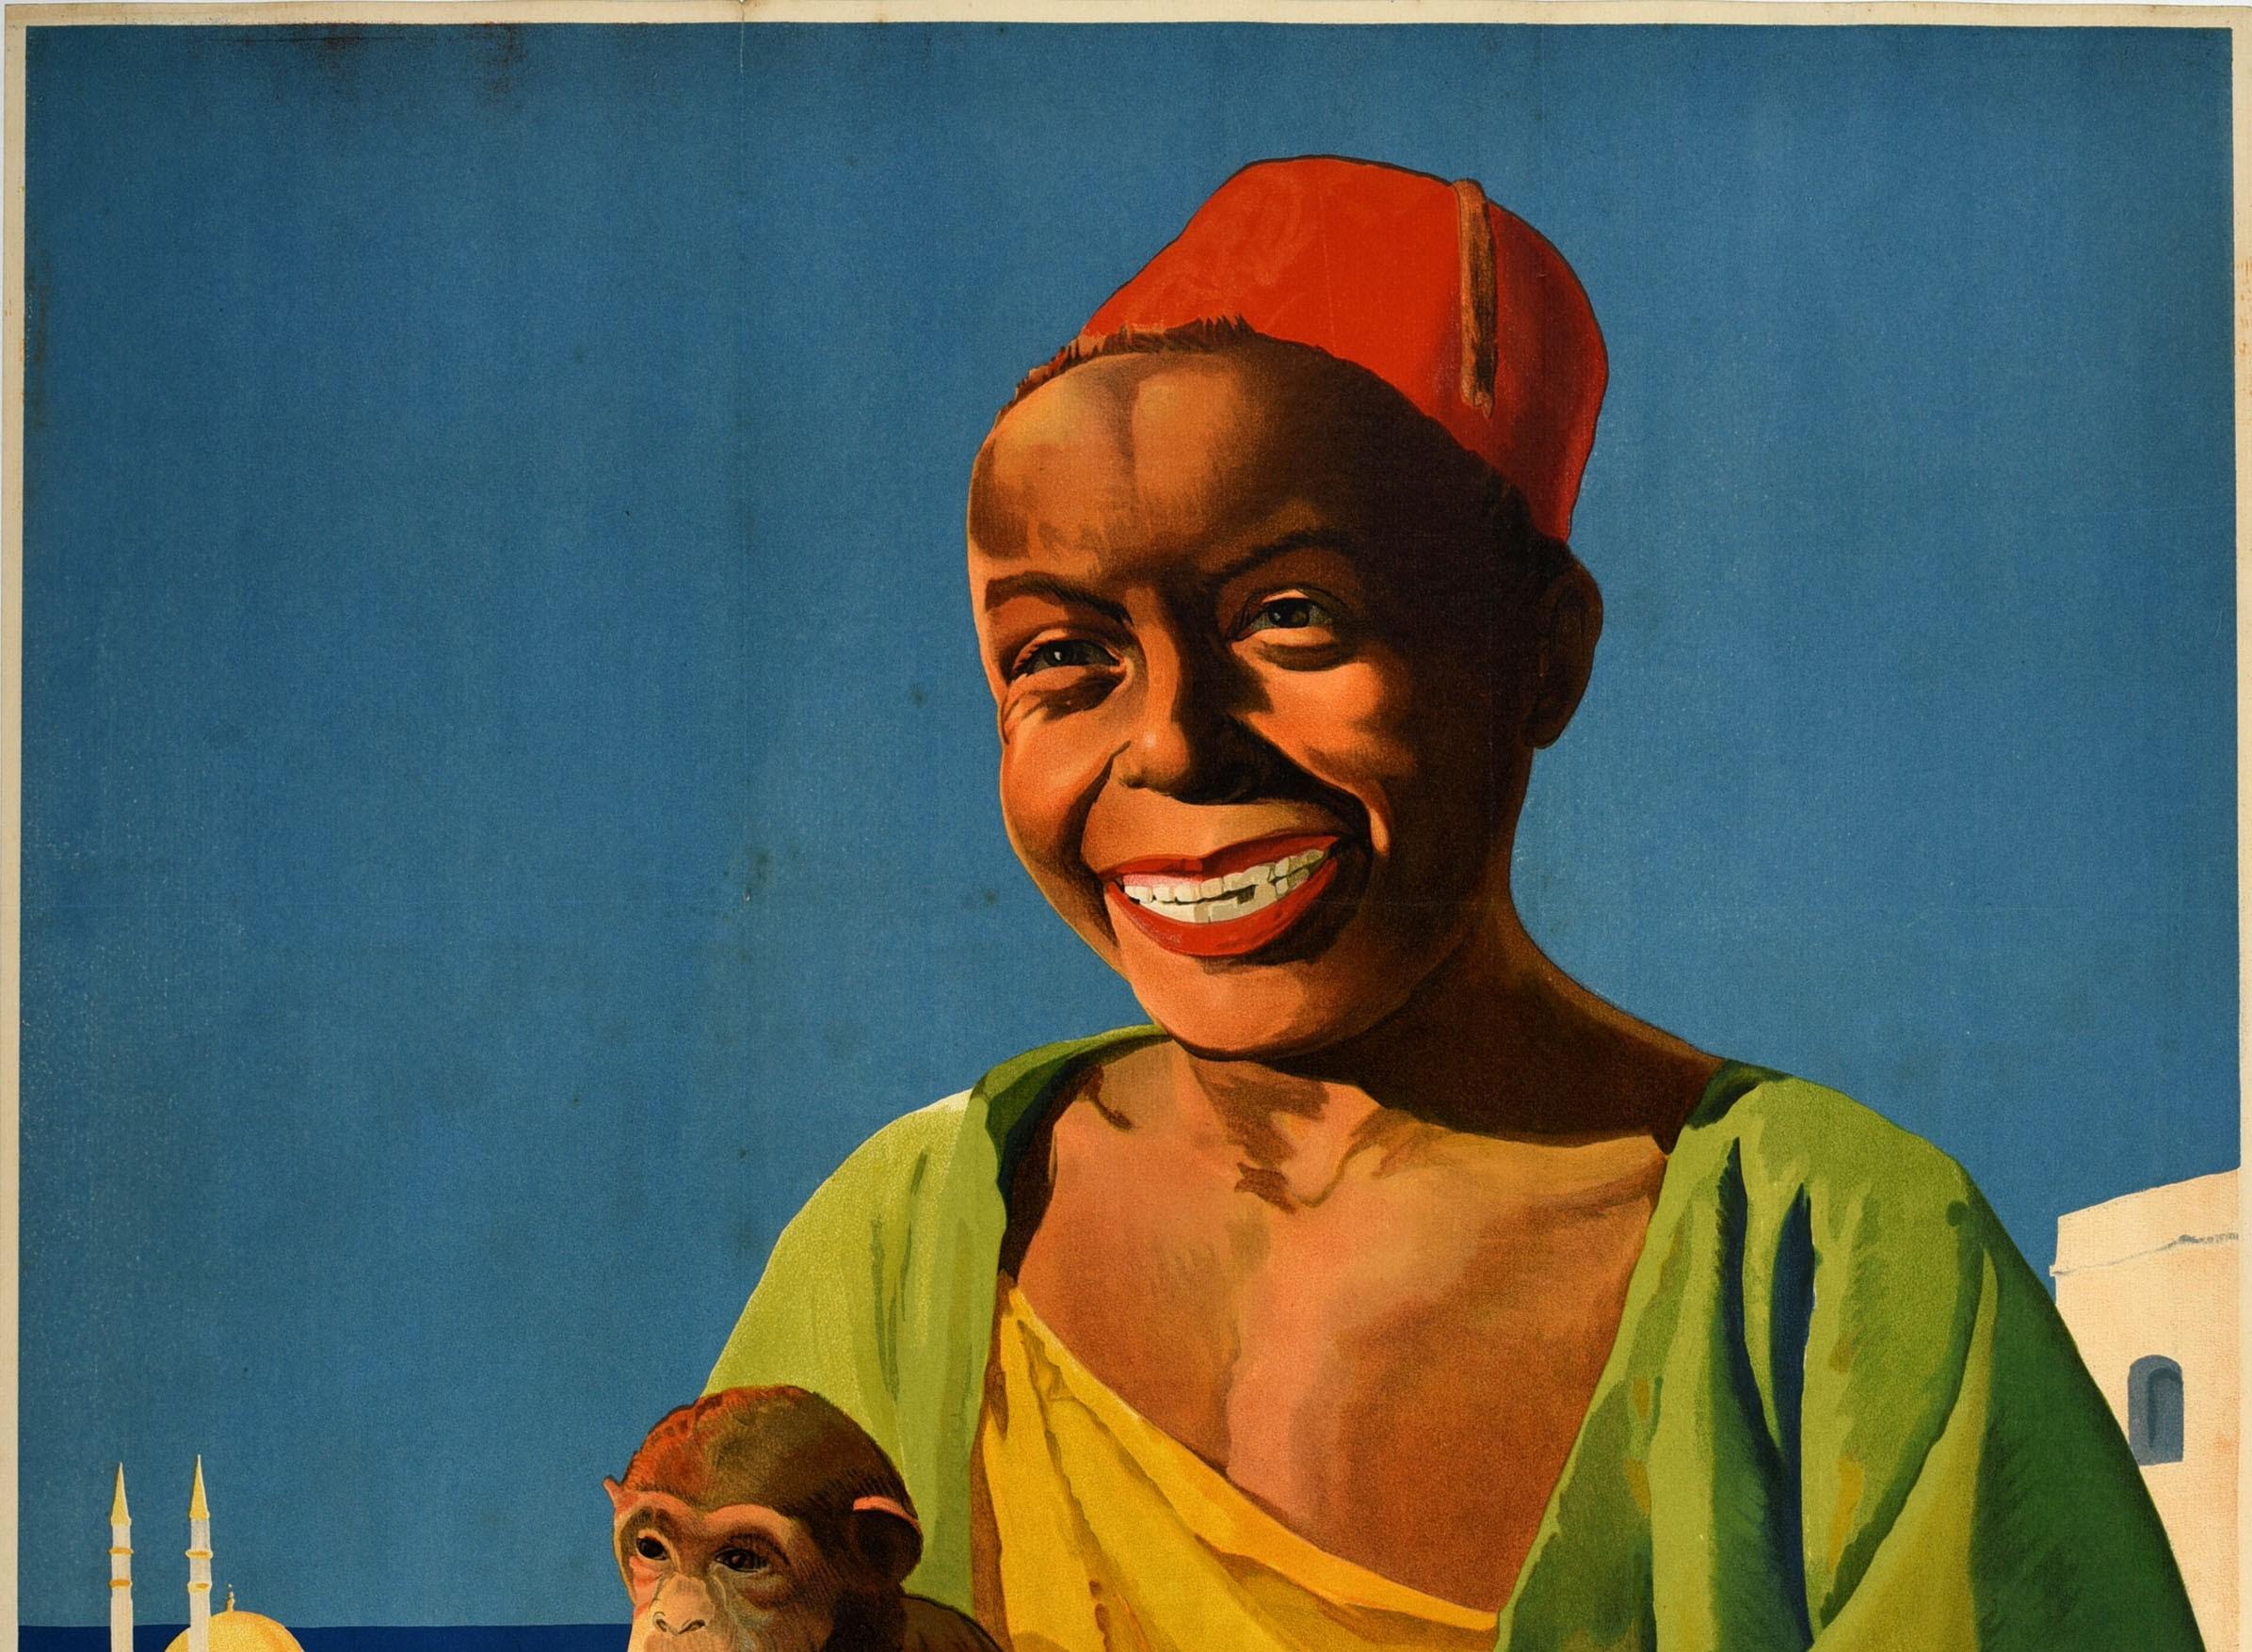 Original vintage travel poster for Royal Mail Line Atlantis Cruises featuring artwork by the British poster designer Percy Padden (1885-1965) depicting a smiling boy with a monkey in the foreground and a view over trees to the city and sea below the